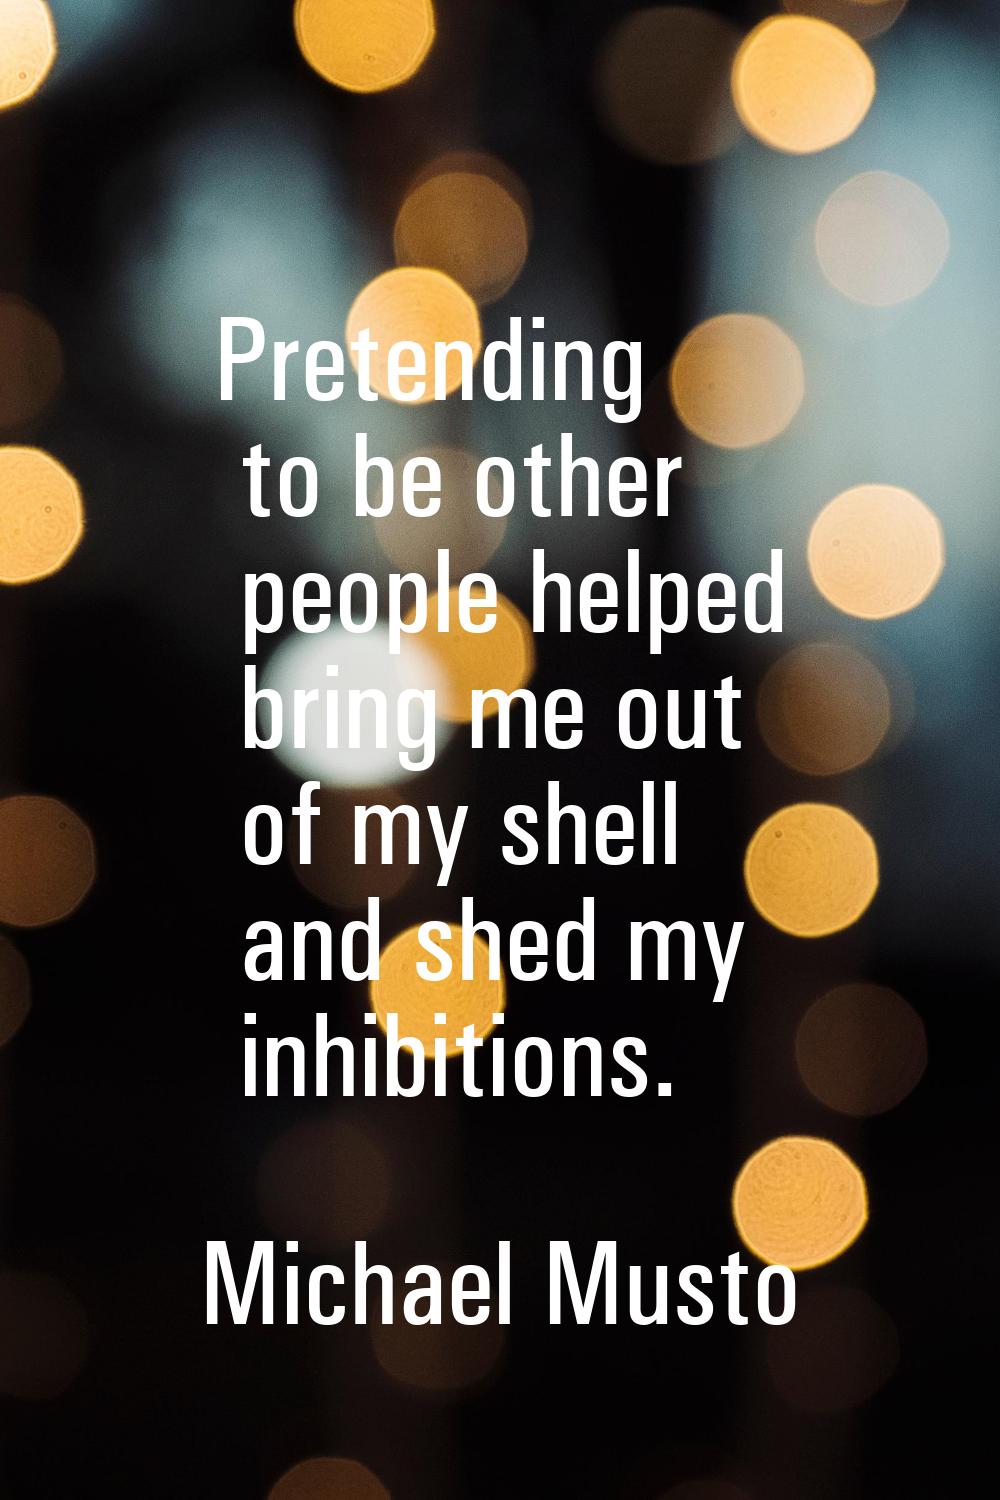 Pretending to be other people helped bring me out of my shell and shed my inhibitions.